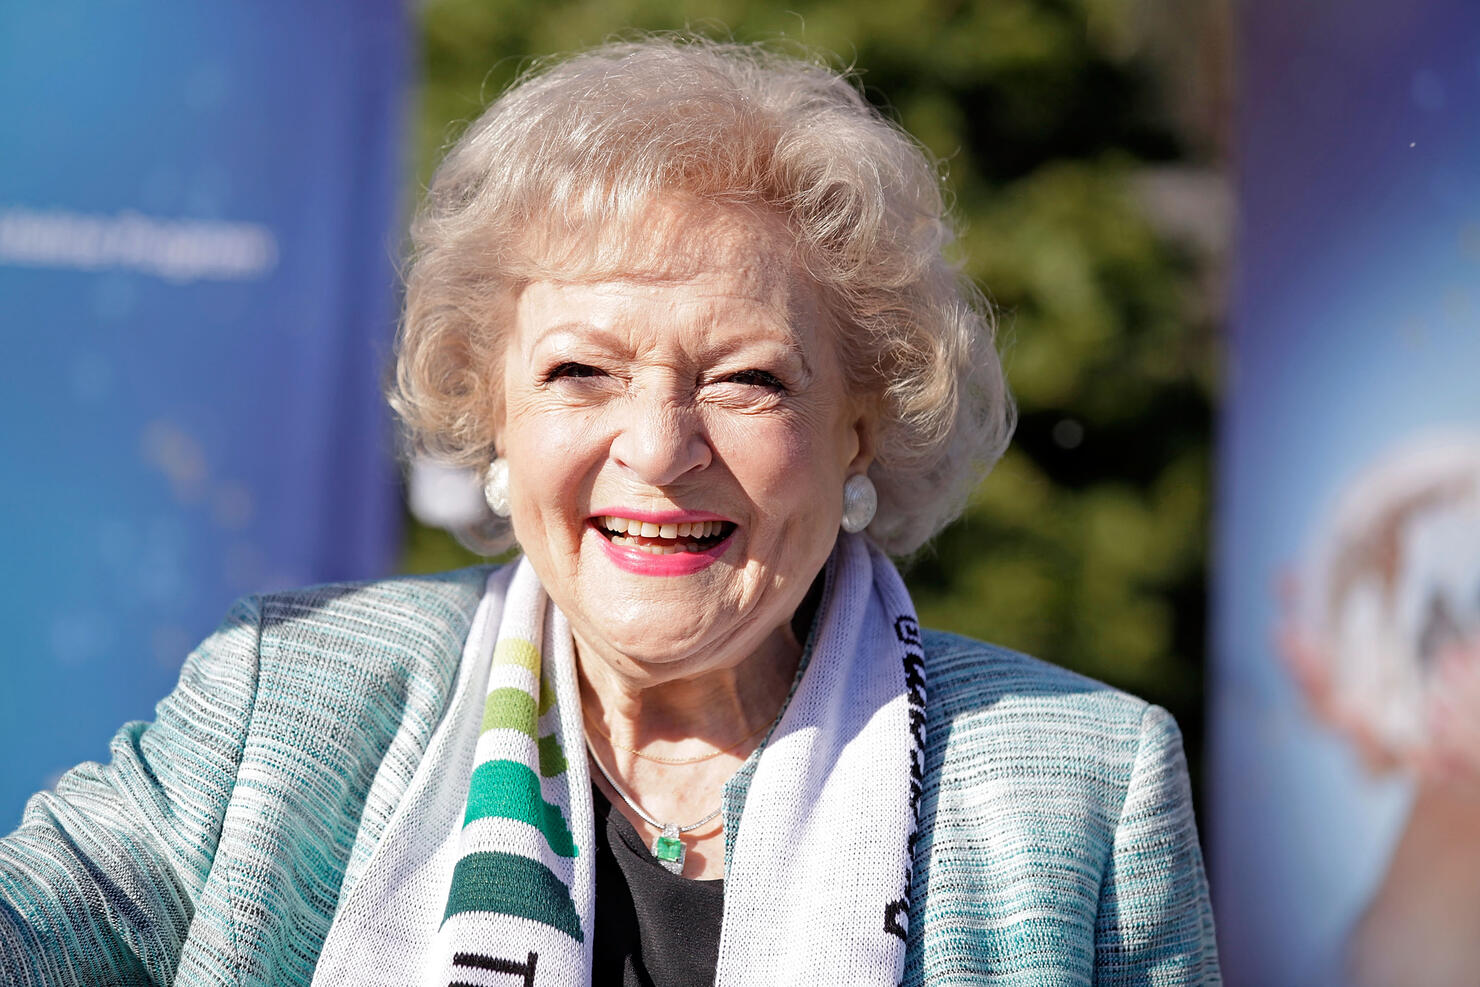 Betty "White Out" Tour At The Los Angeles Zoo With The Lifeline Program